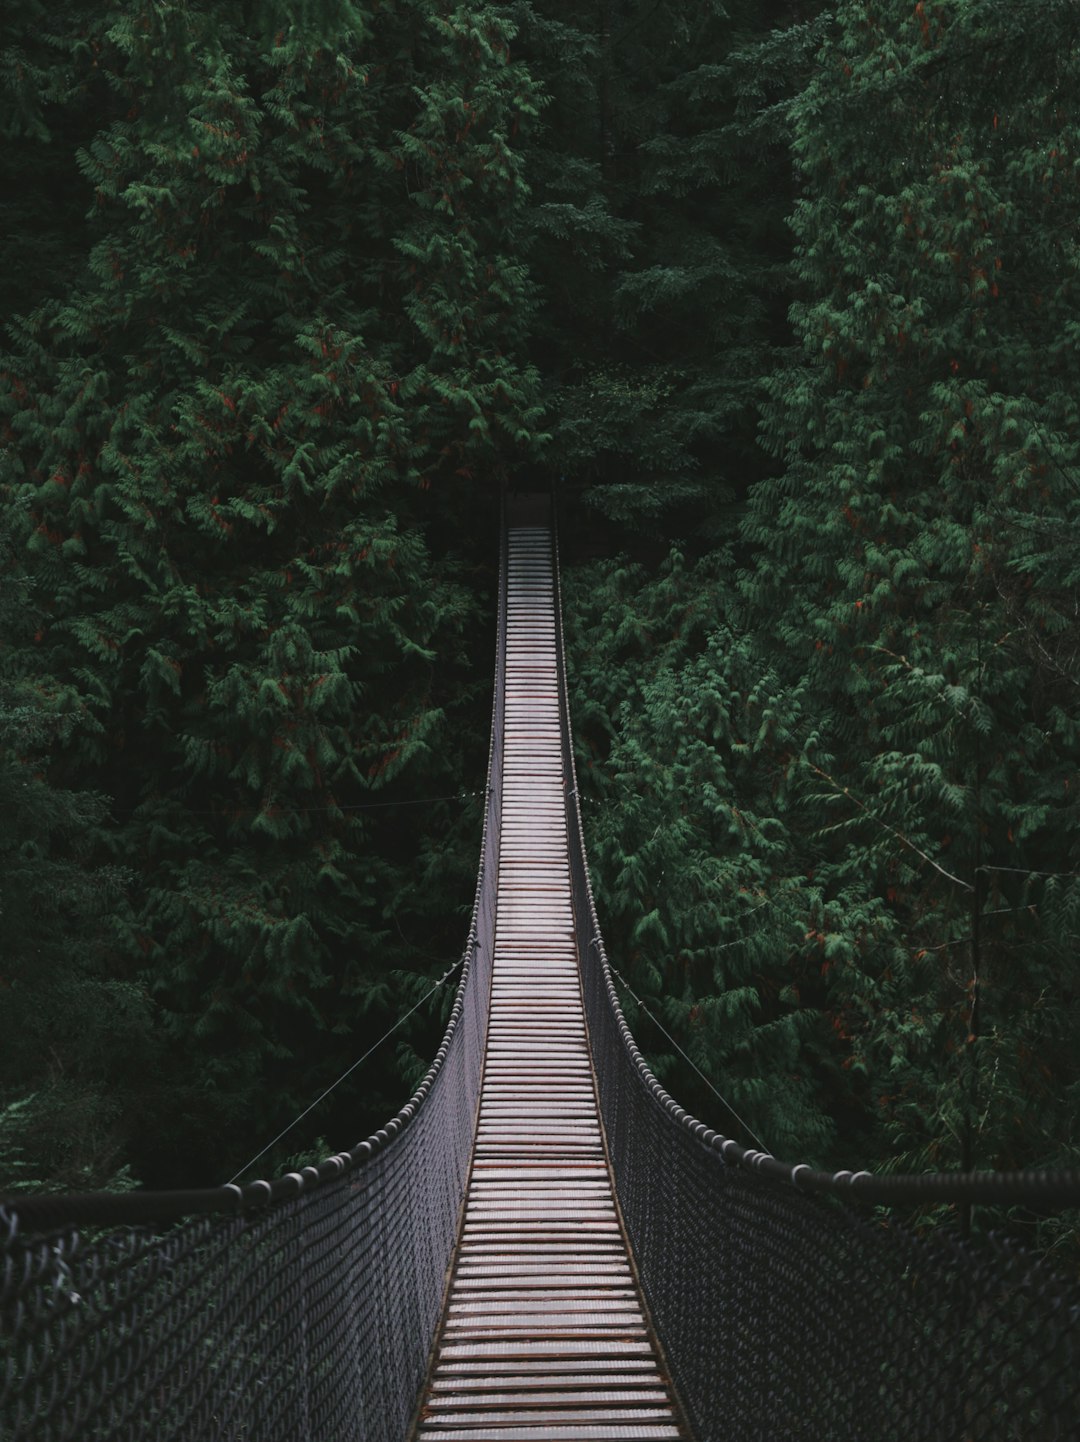 It took me literally ten minutes to take this picture at Lynn Canyon, North Vancouver. That place is so busy that I had to wait about 10 minutes for the people to move out from the scene and make this bridge kind of abandoned.